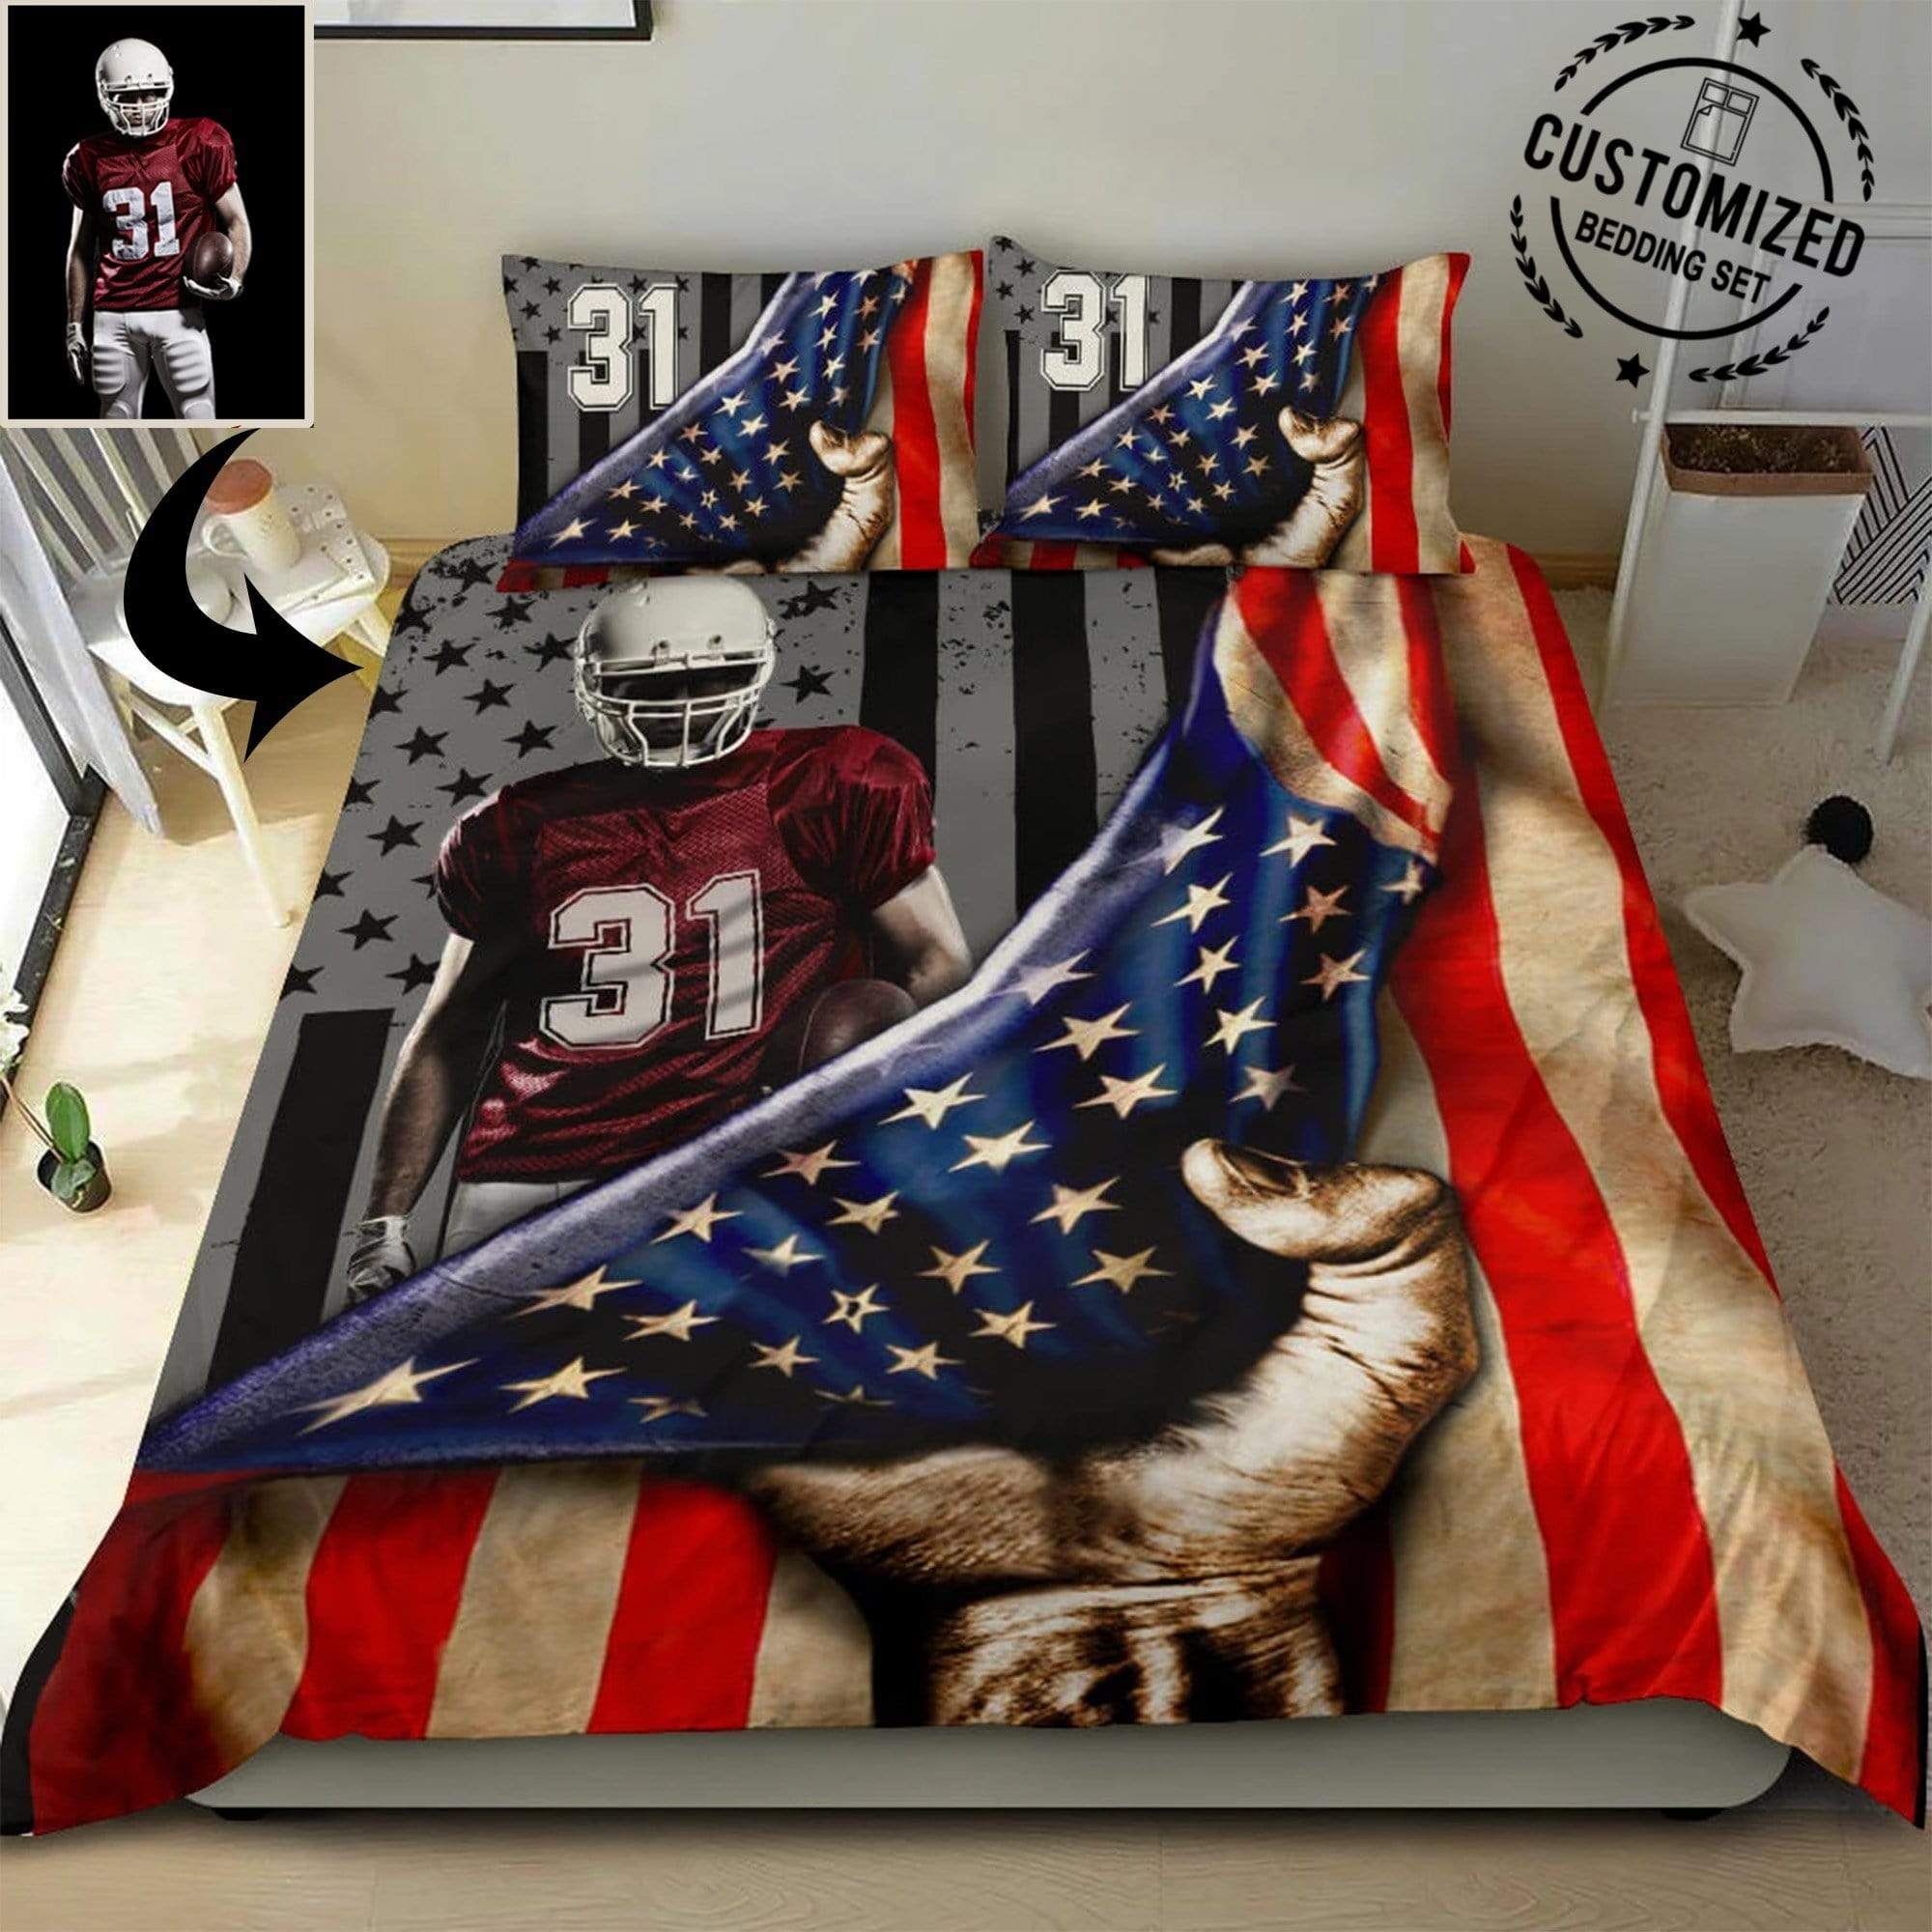 Personalized American Football Player Under Flag Custom Duvet Cover Bedding Set With Your Number & Image